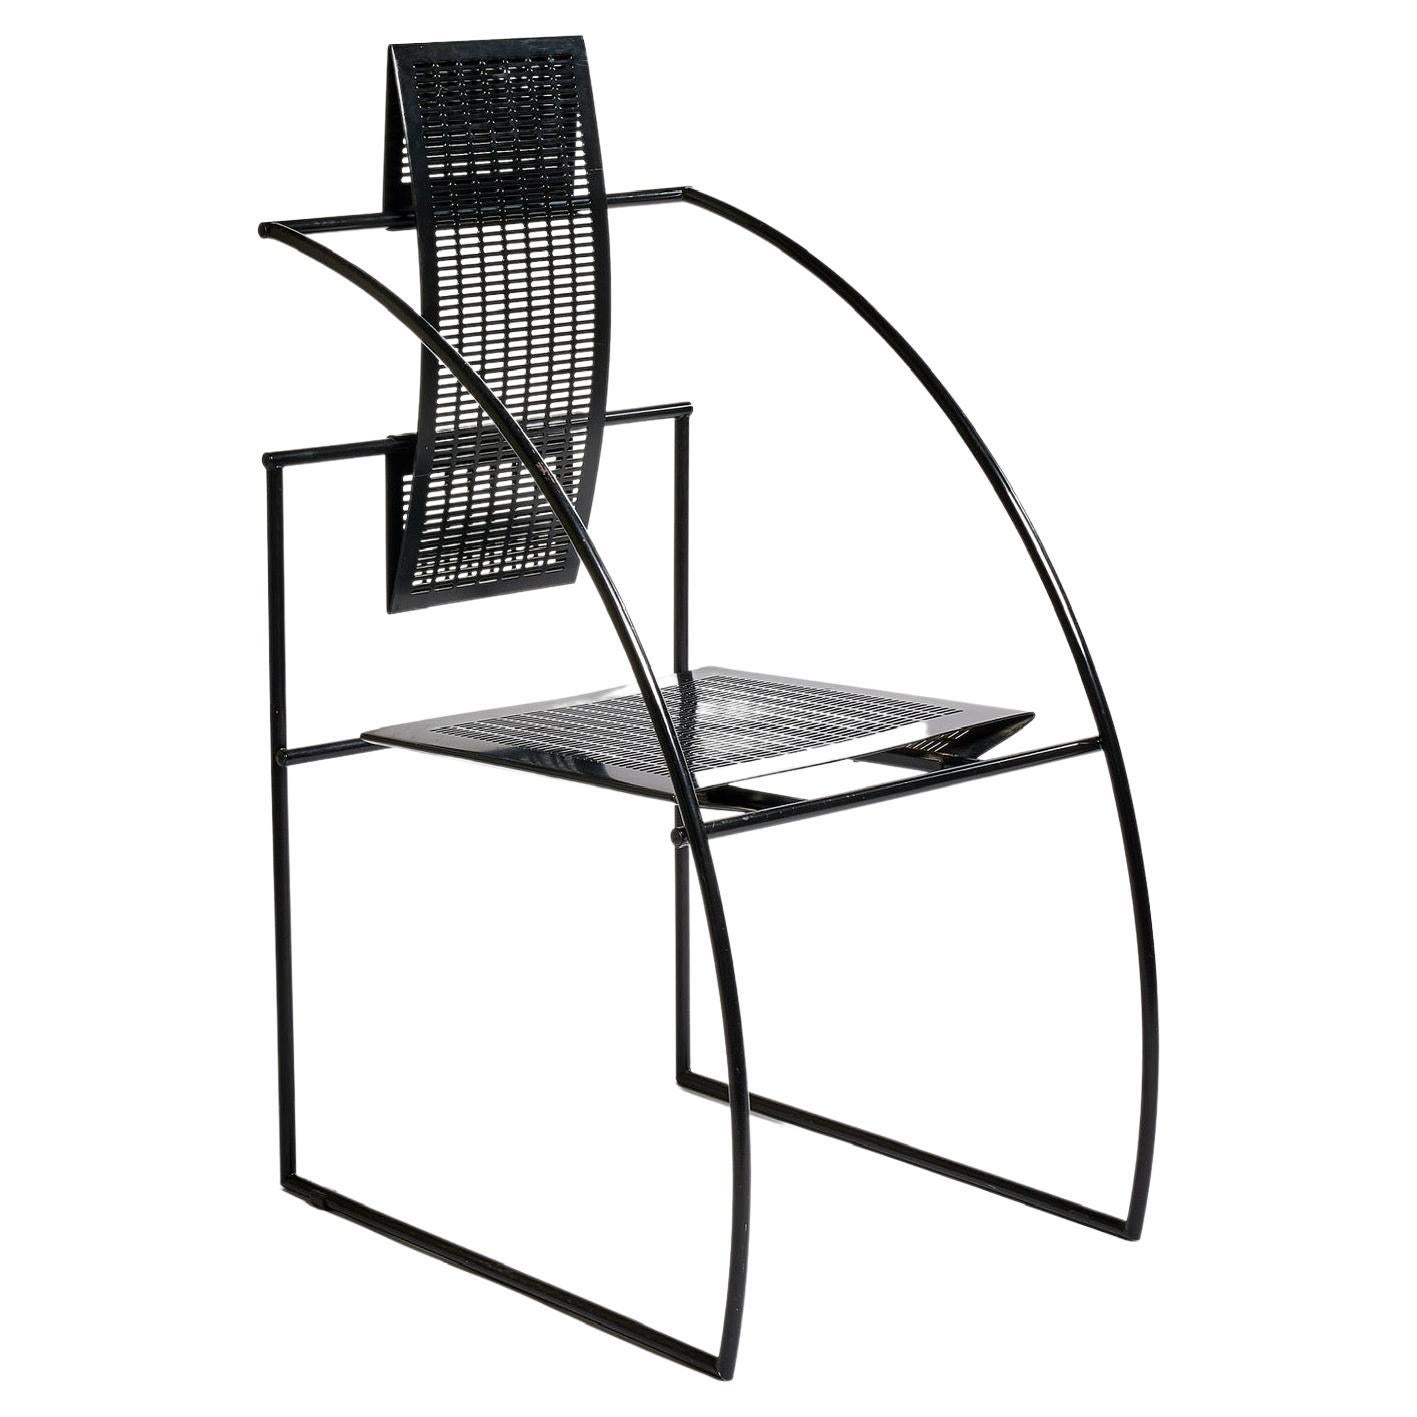 Quinta chair by Mario Botta for Alias, Italy 1984 For Sale